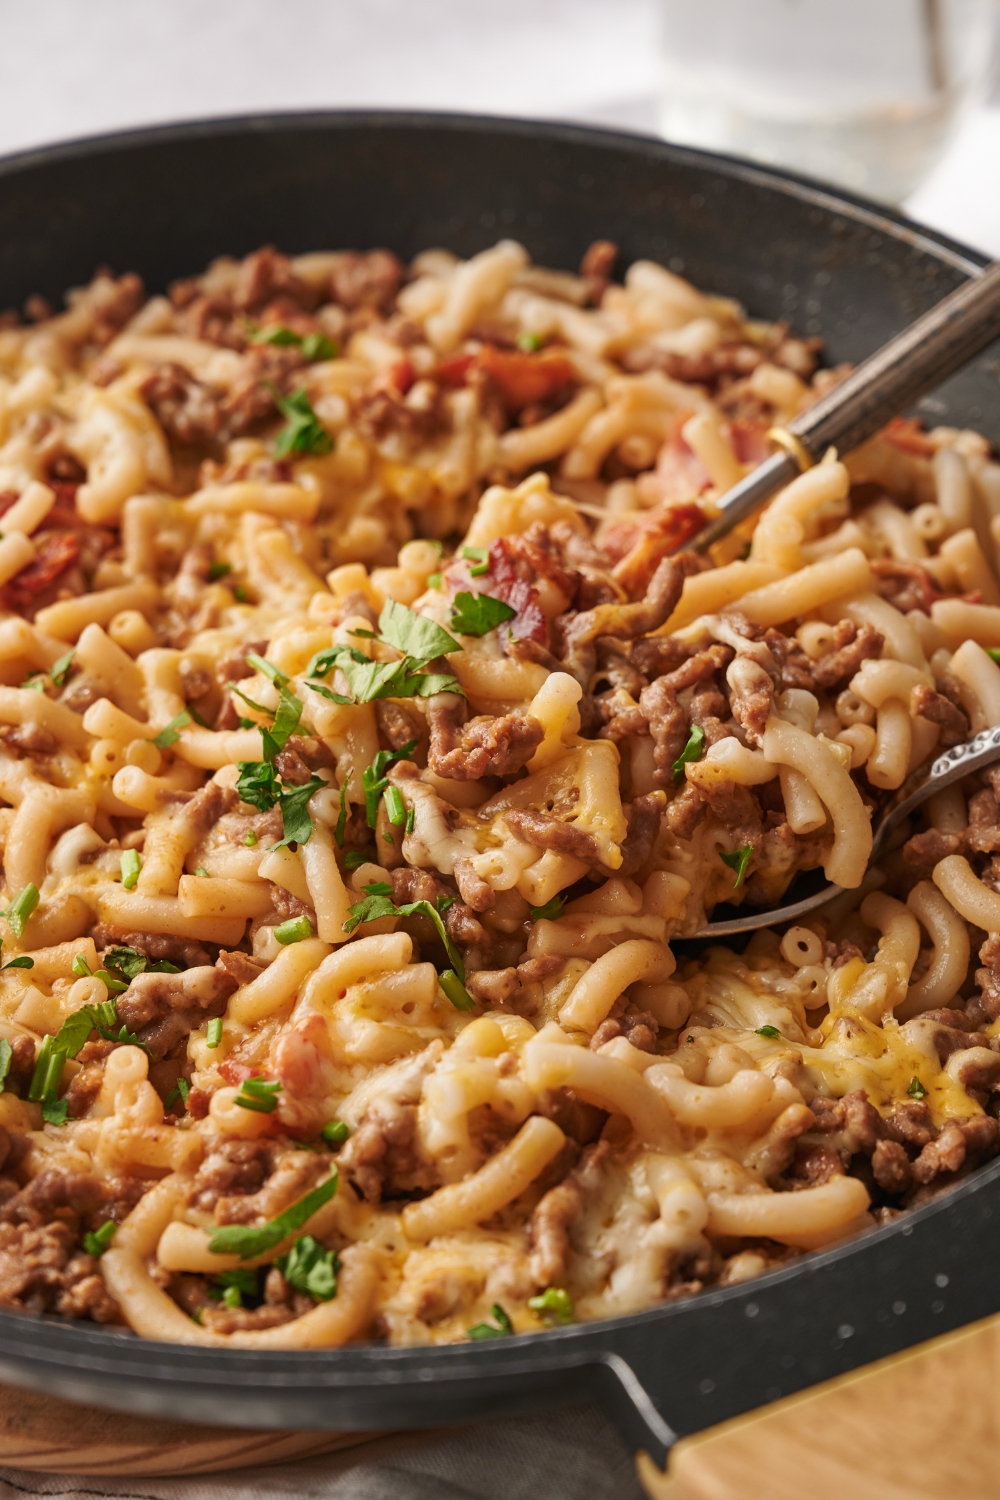 A skillet filled with bacon cheeseburger casserole with chunks of bacon and ground beef. The casserole is garnished with fresh herbs and there are two spoons in the skillet.